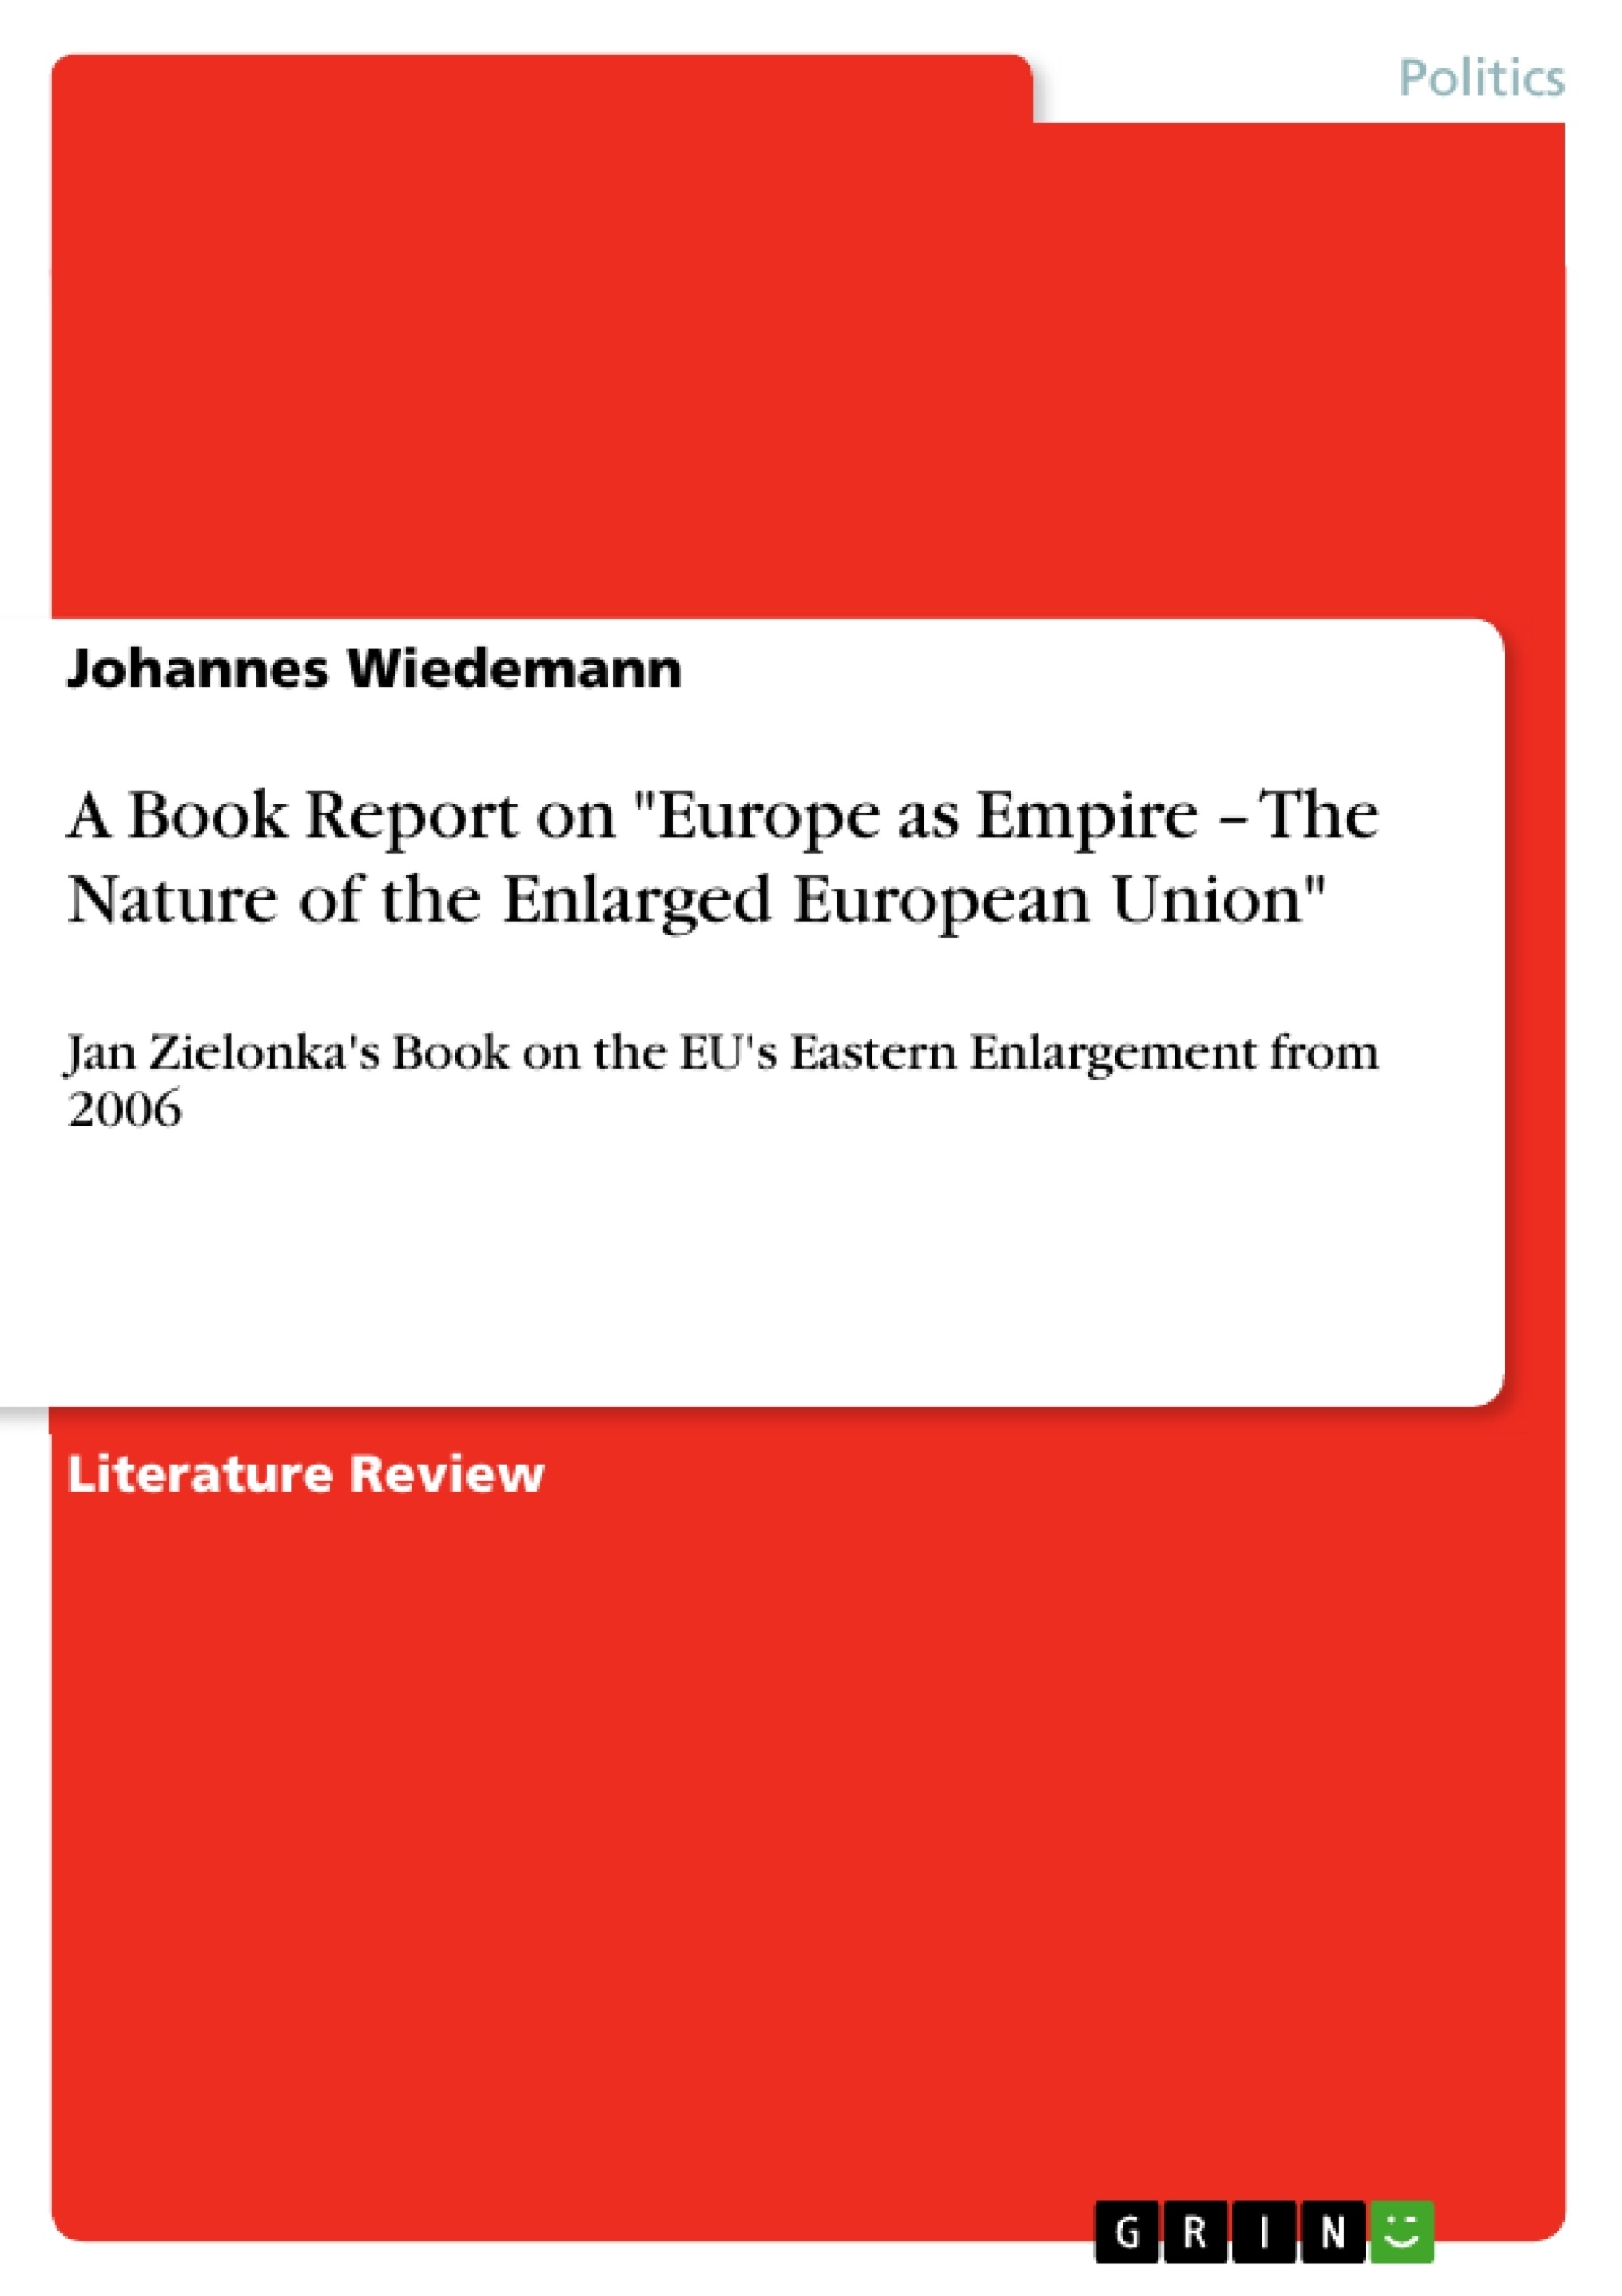 Title: A Book Report on "Europe as Empire – The Nature of the Enlarged European Union"